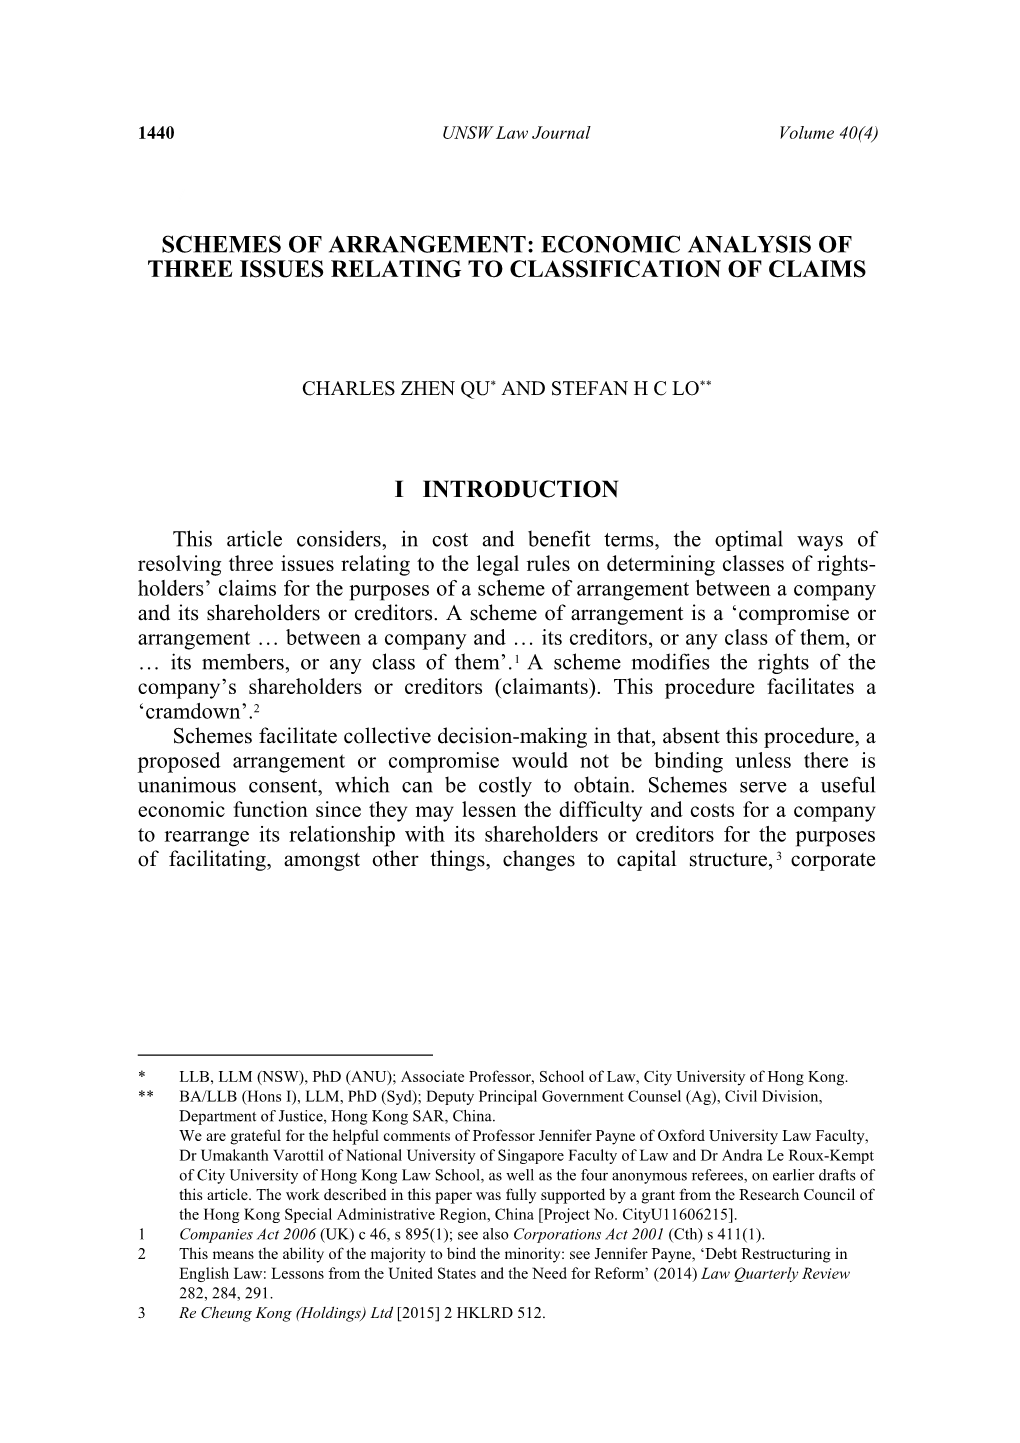 Schemes of Arrangement: Economic Analysis of Three Issues Relating to Classification of Claims